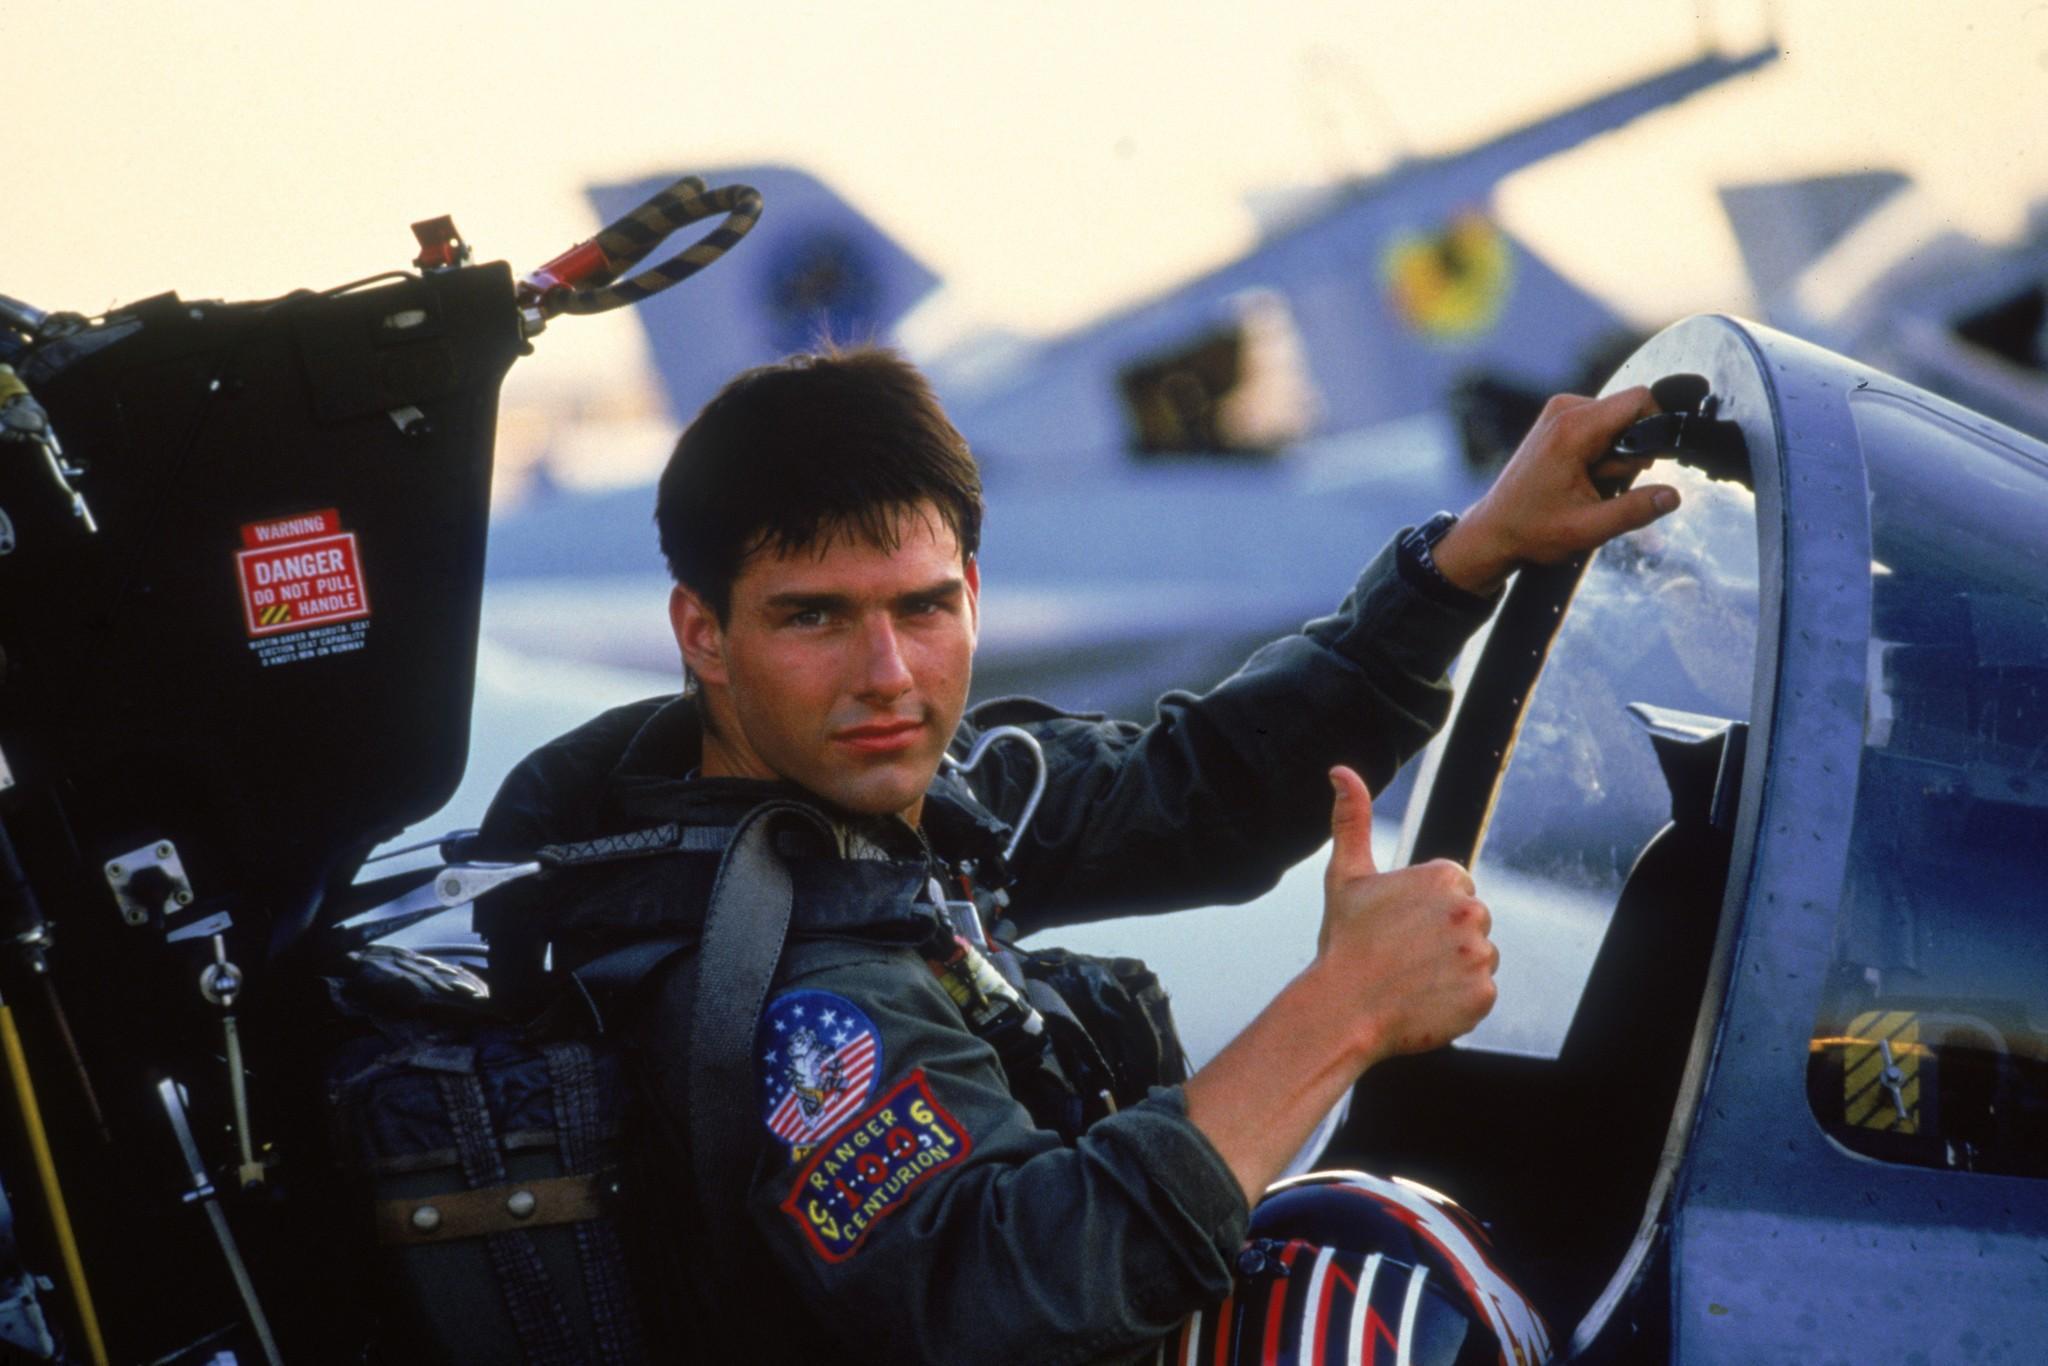 Ask a Fighter Pilot: Are Top Gun quotes taboo? | Fighter Sweep